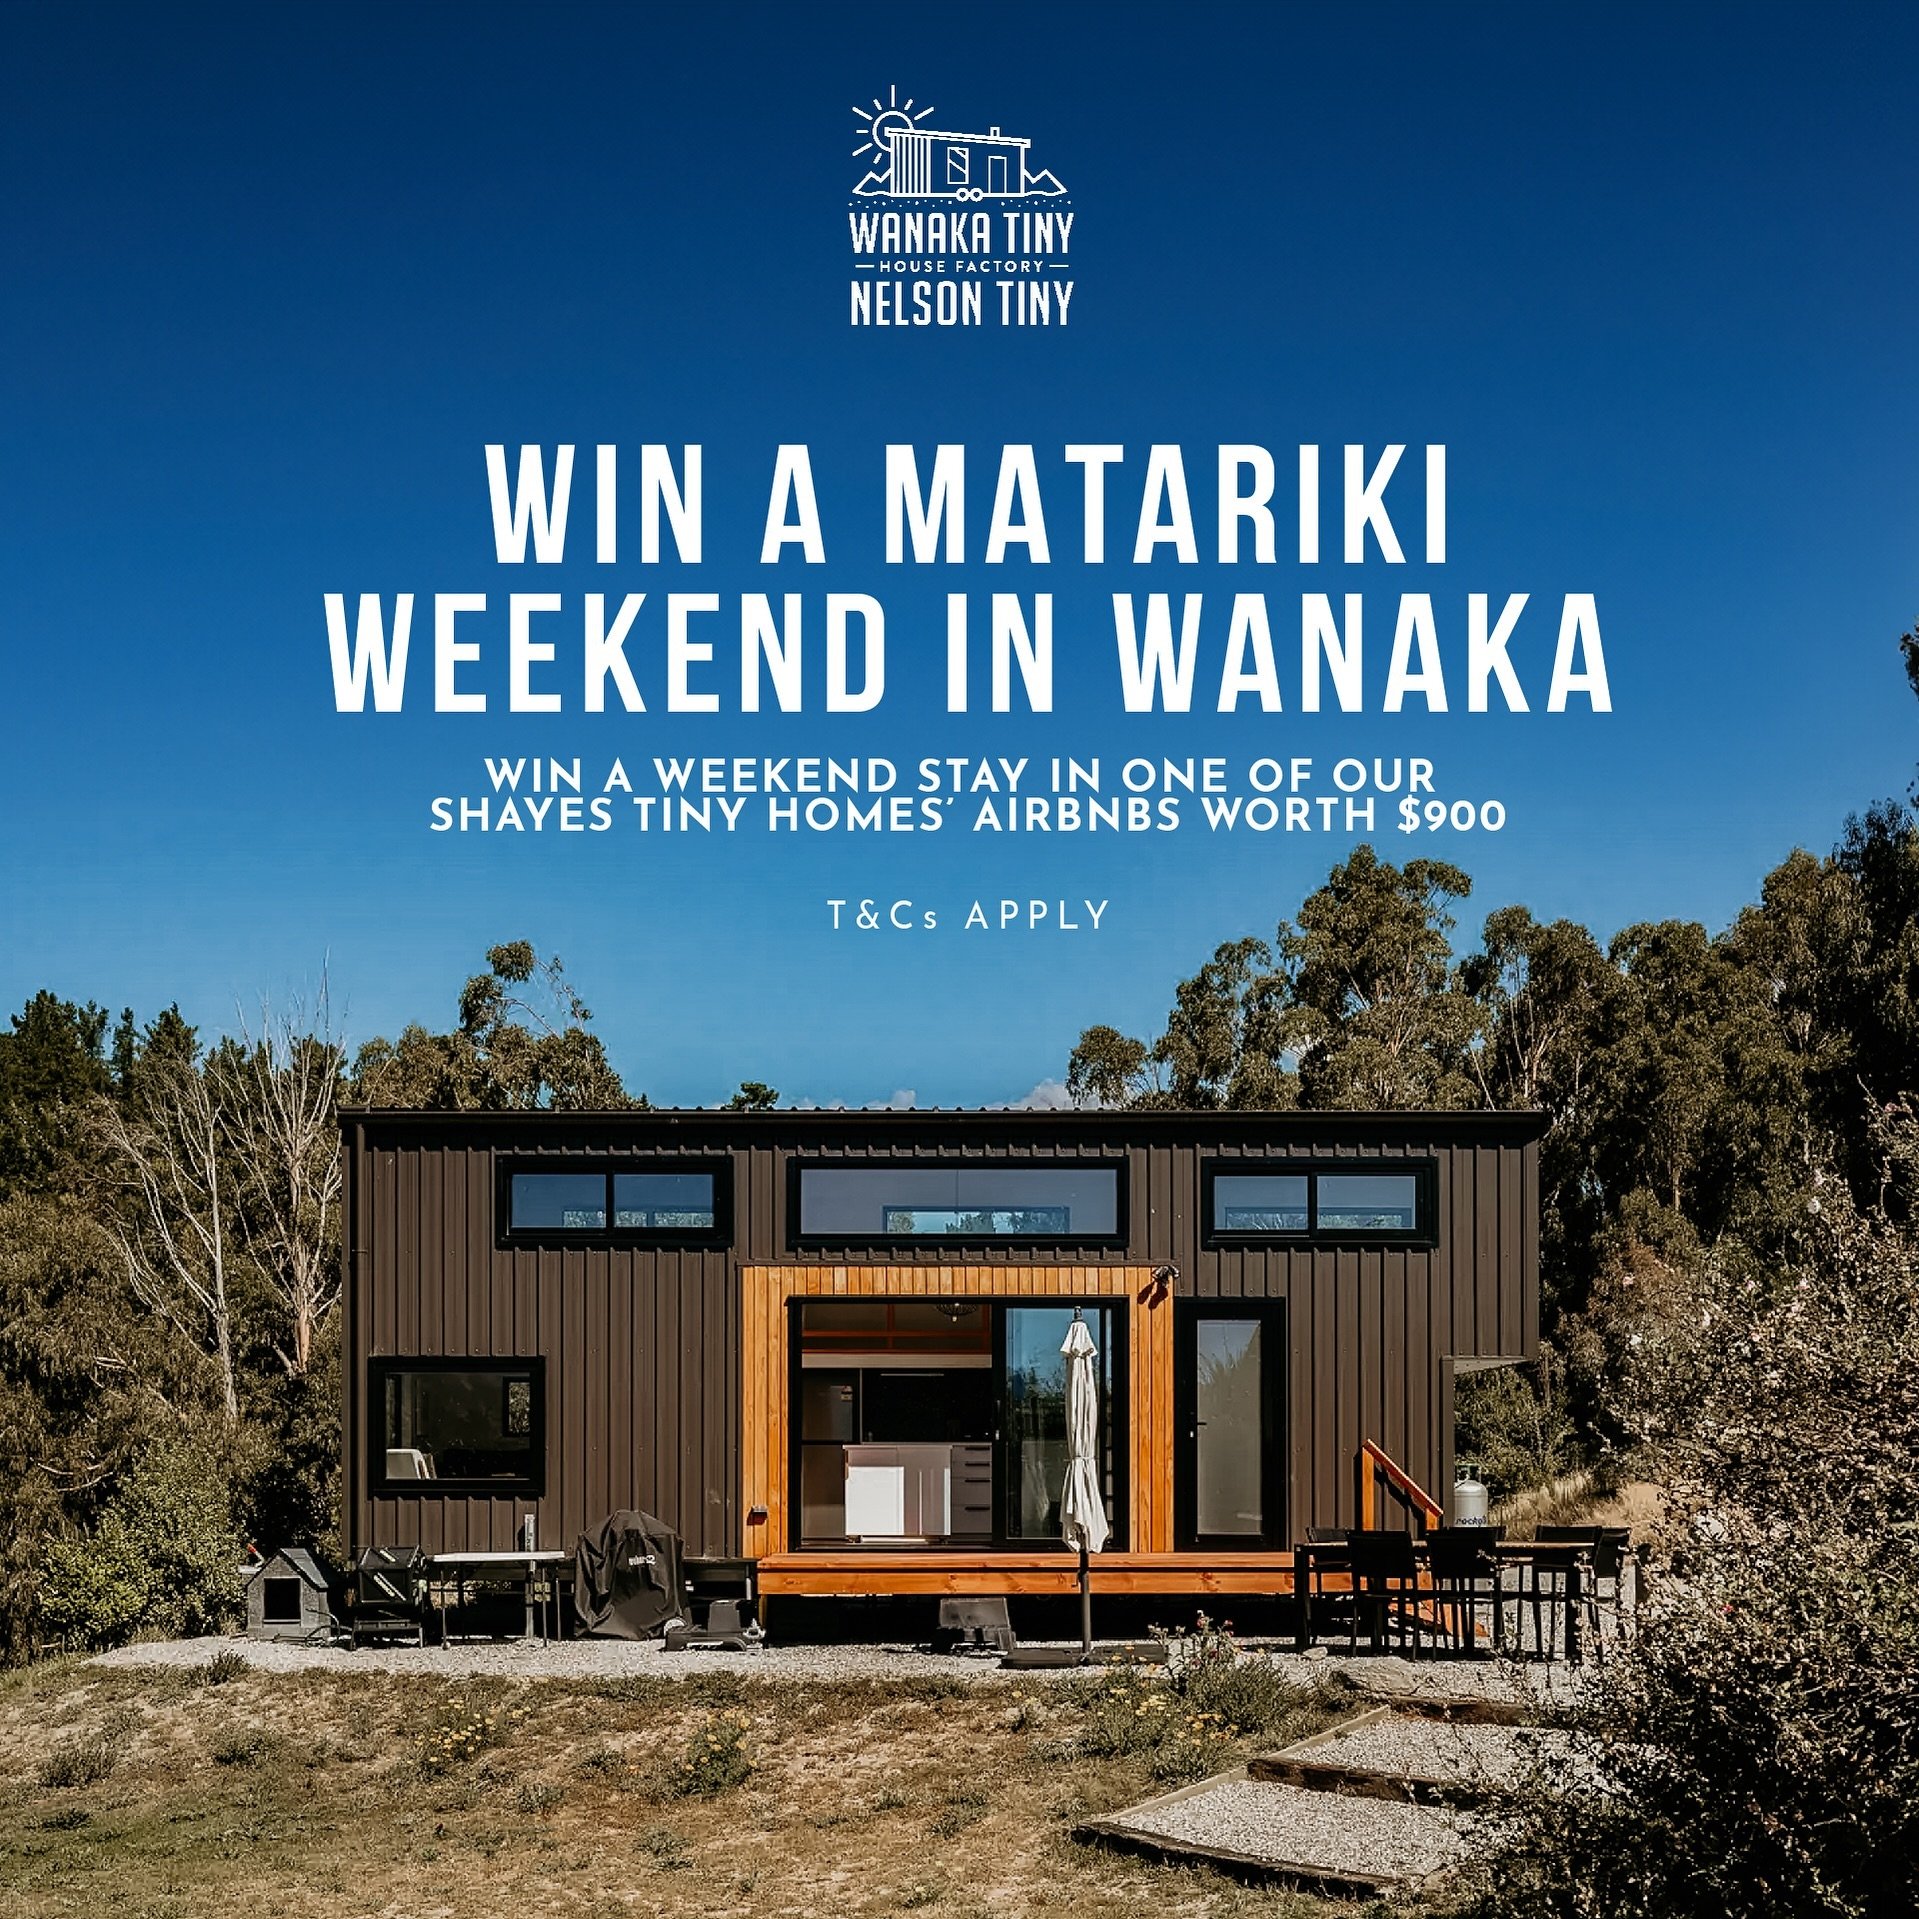 Be in to win a Matariki Weekend in Wanaka worth $900!
Experience the luxury of a Shaye's Tiny Home @shayes_tiny_homes built by Wanaka Tiny, enjoying the fabulous Lake Wanaka Matariki celebrations.
To be in the draw, enter your details on our website.